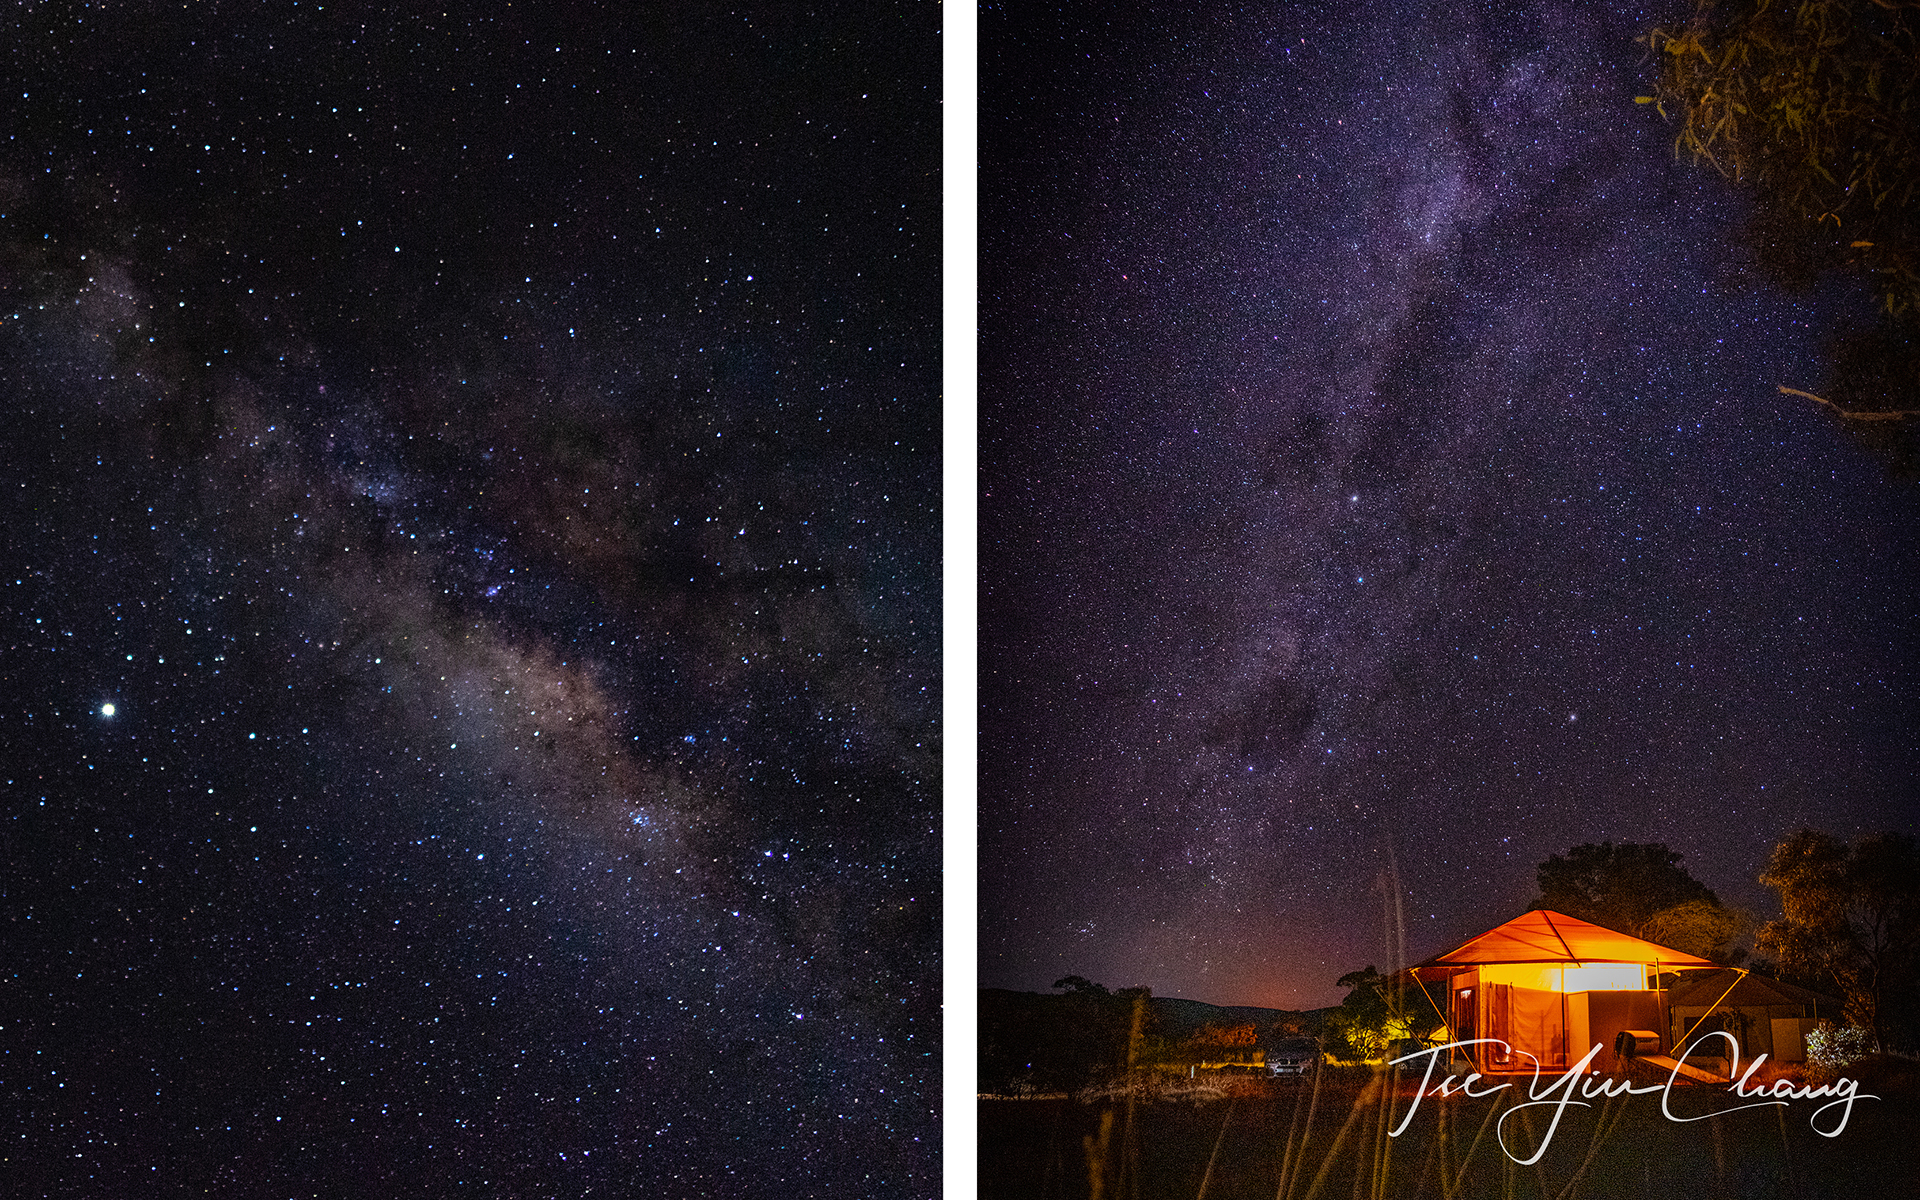 The Karijini Eco Retreat is a perfect place to try my hand at astrophotography as I don't get the change to photograph this many stars in Perth